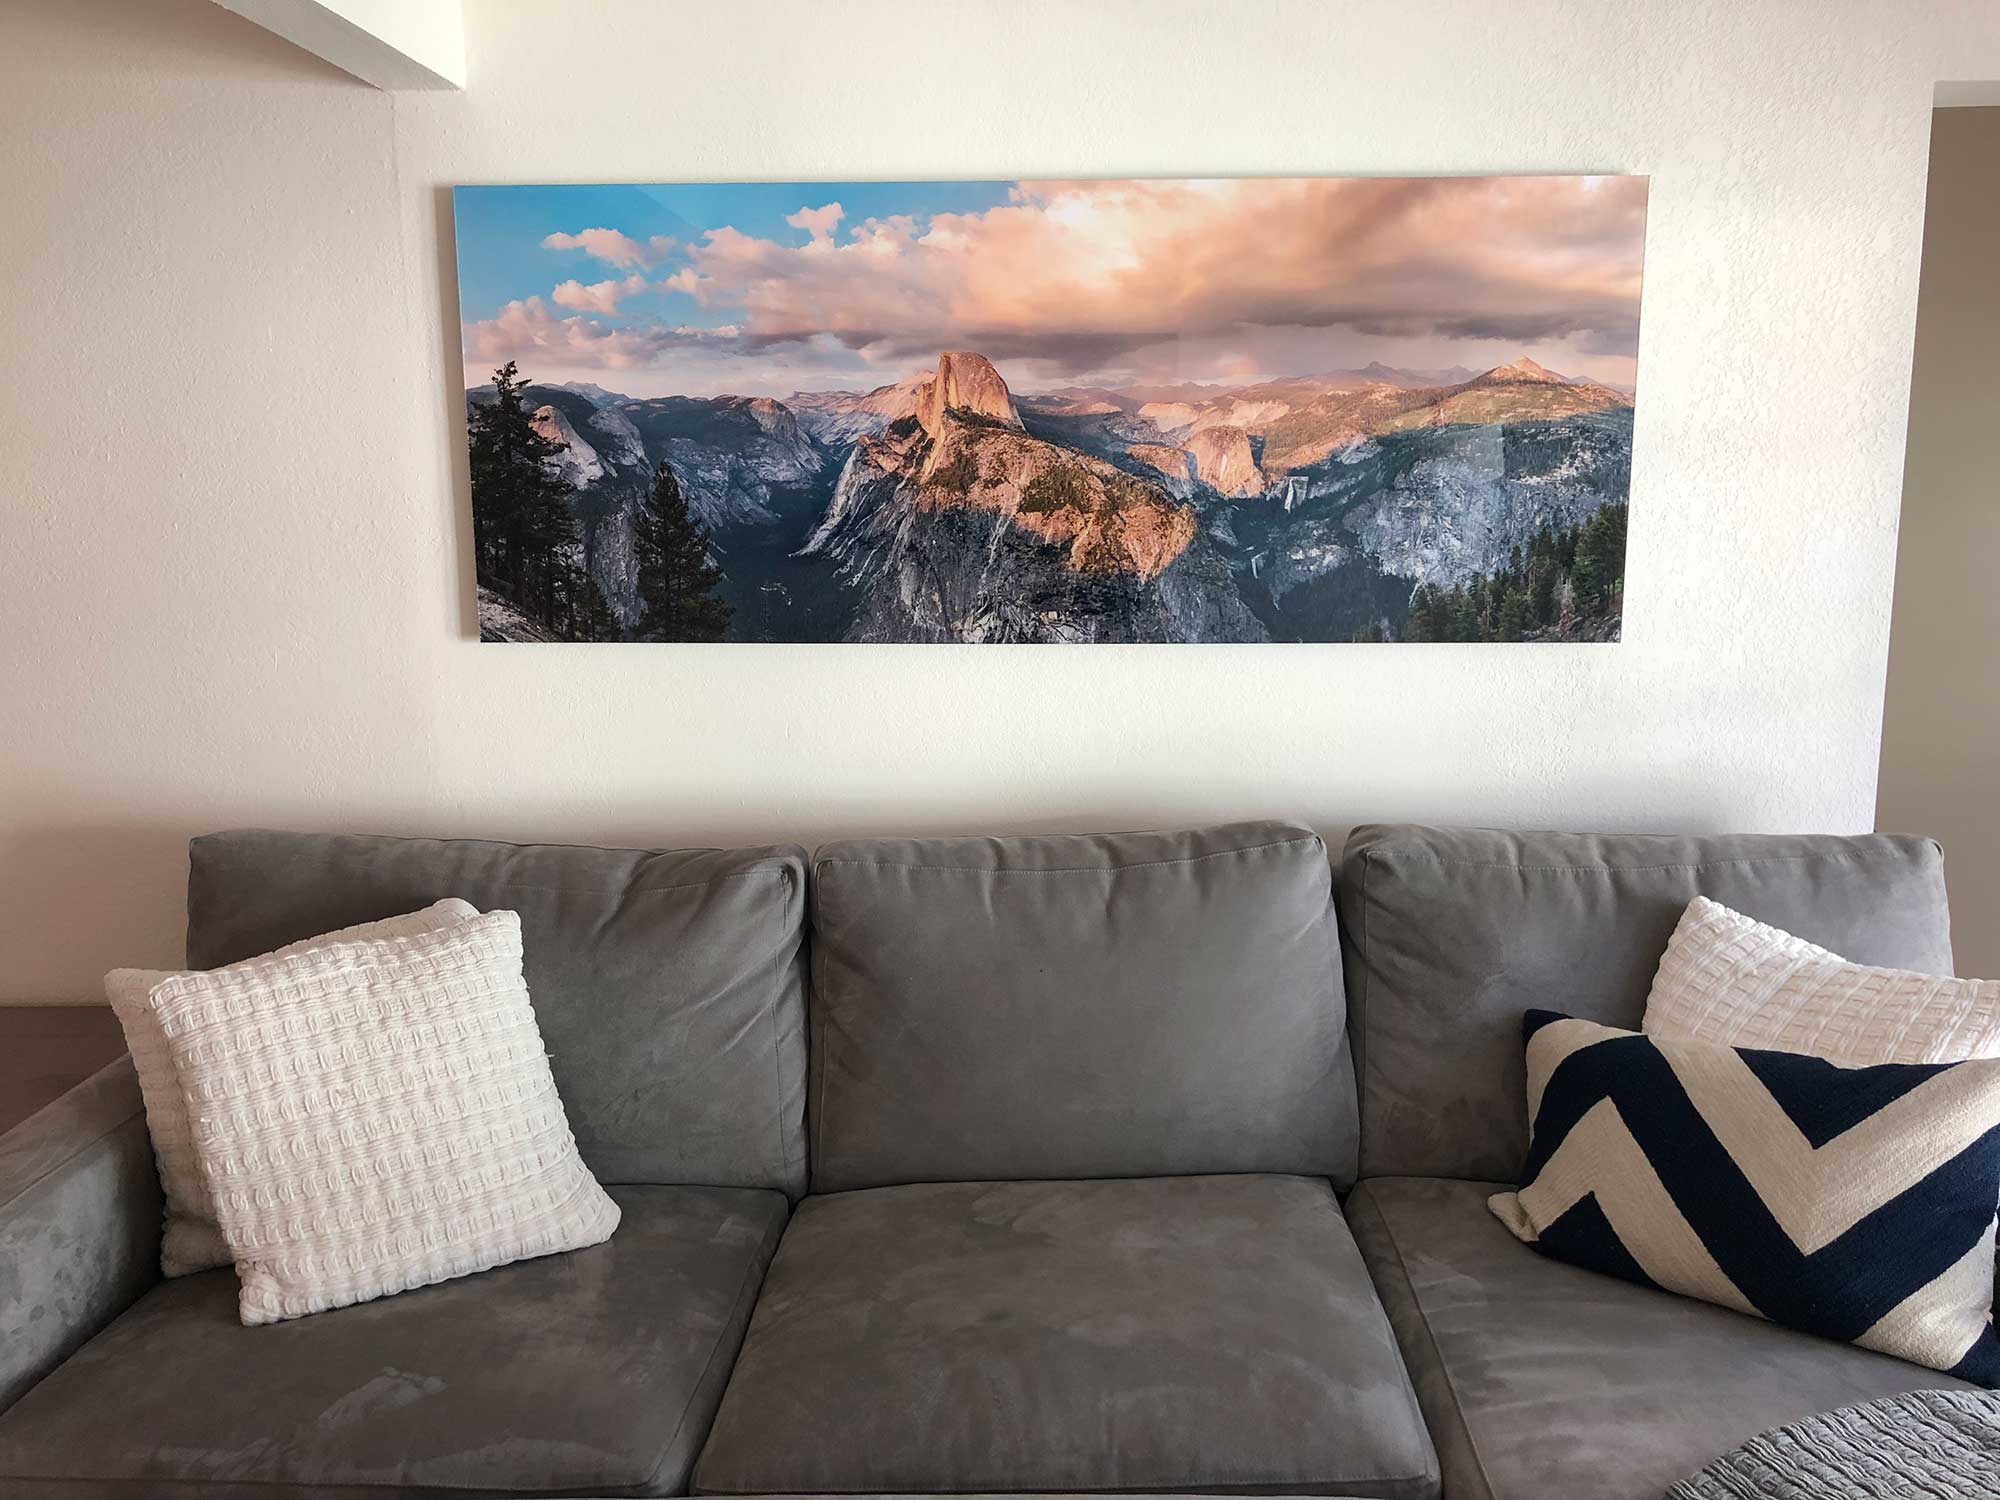 Stormy Yosemite Sunset", a VAST photo by Justin Katz hanging in a living room